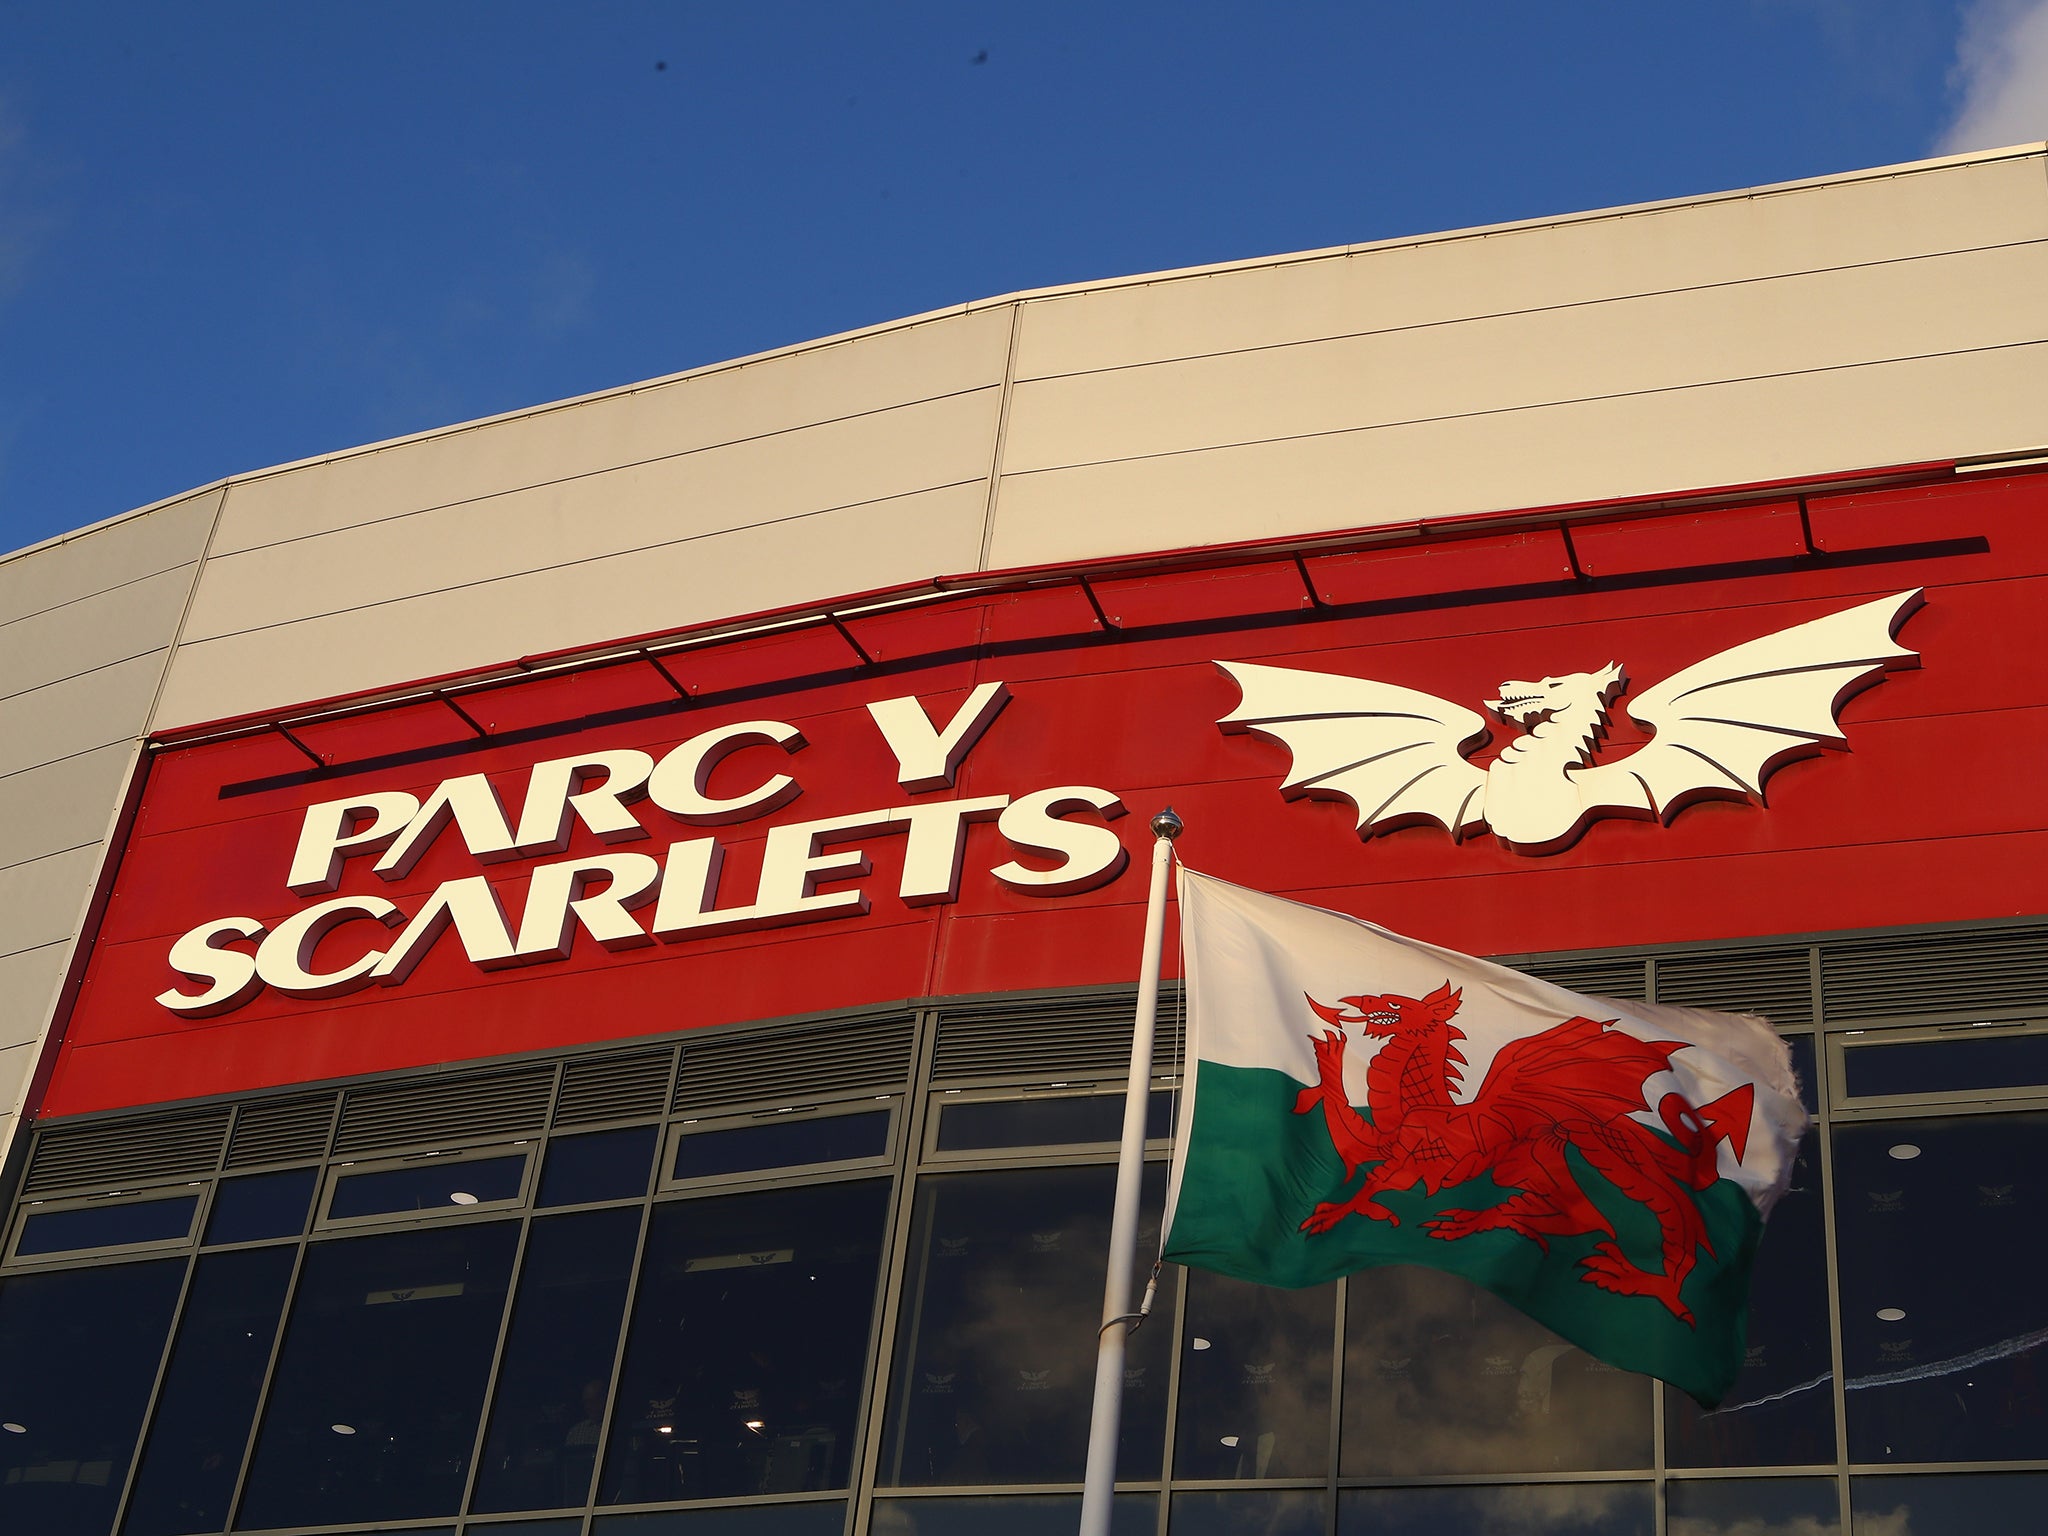 Scarlets have announced that an investigation is taking place after reports of racial abuse